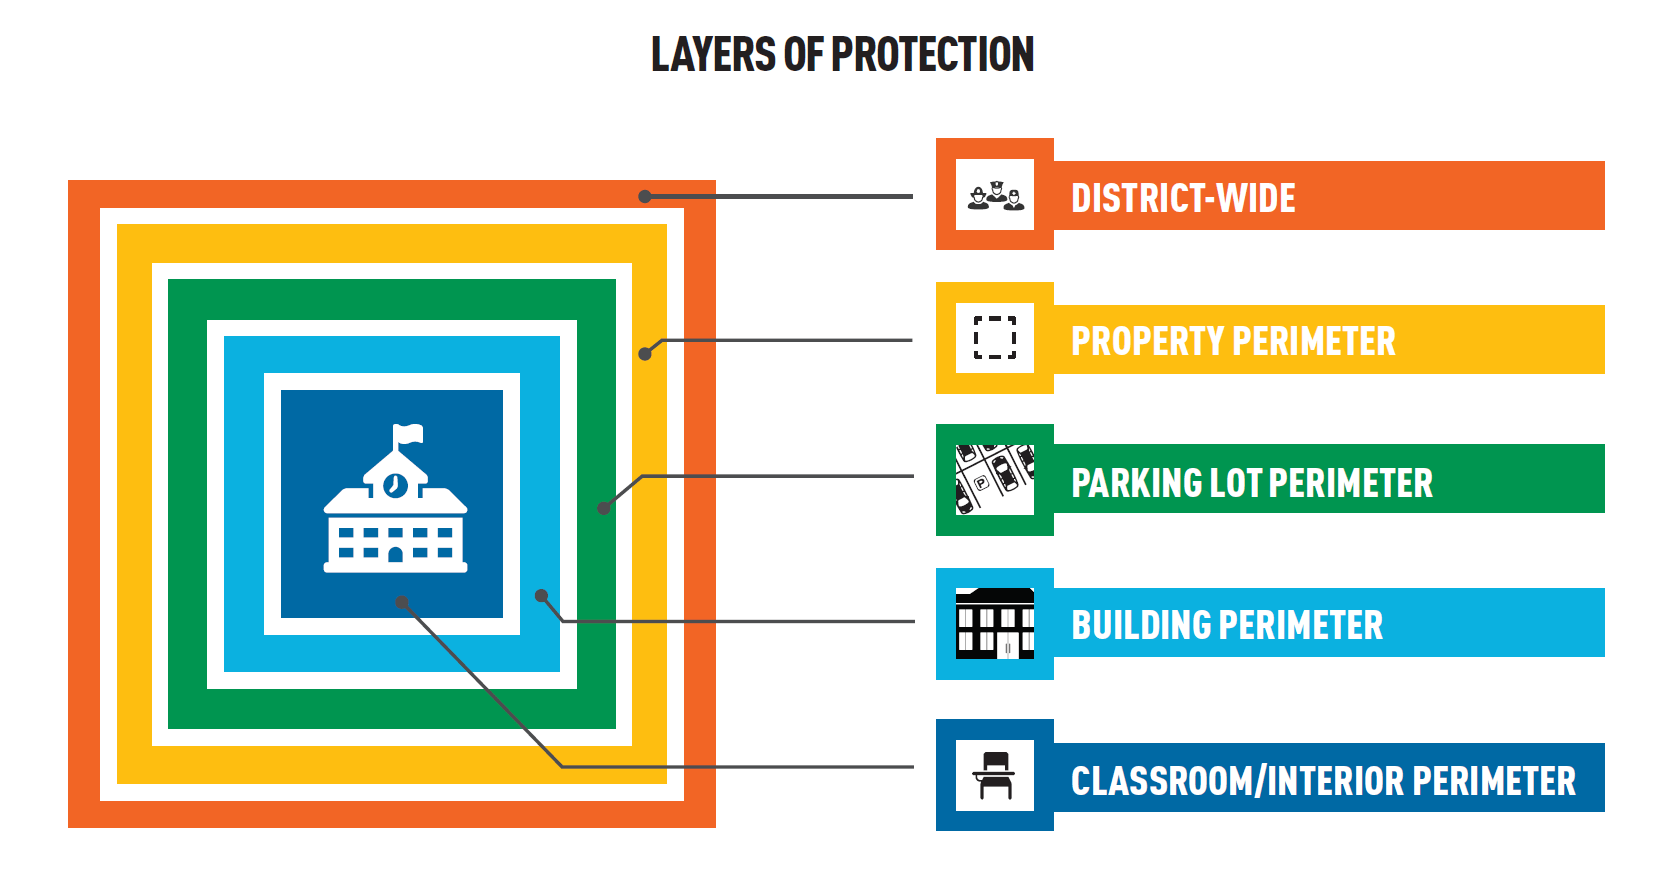 Partner Alliance for Safer Schools (PASS) security layers of protection